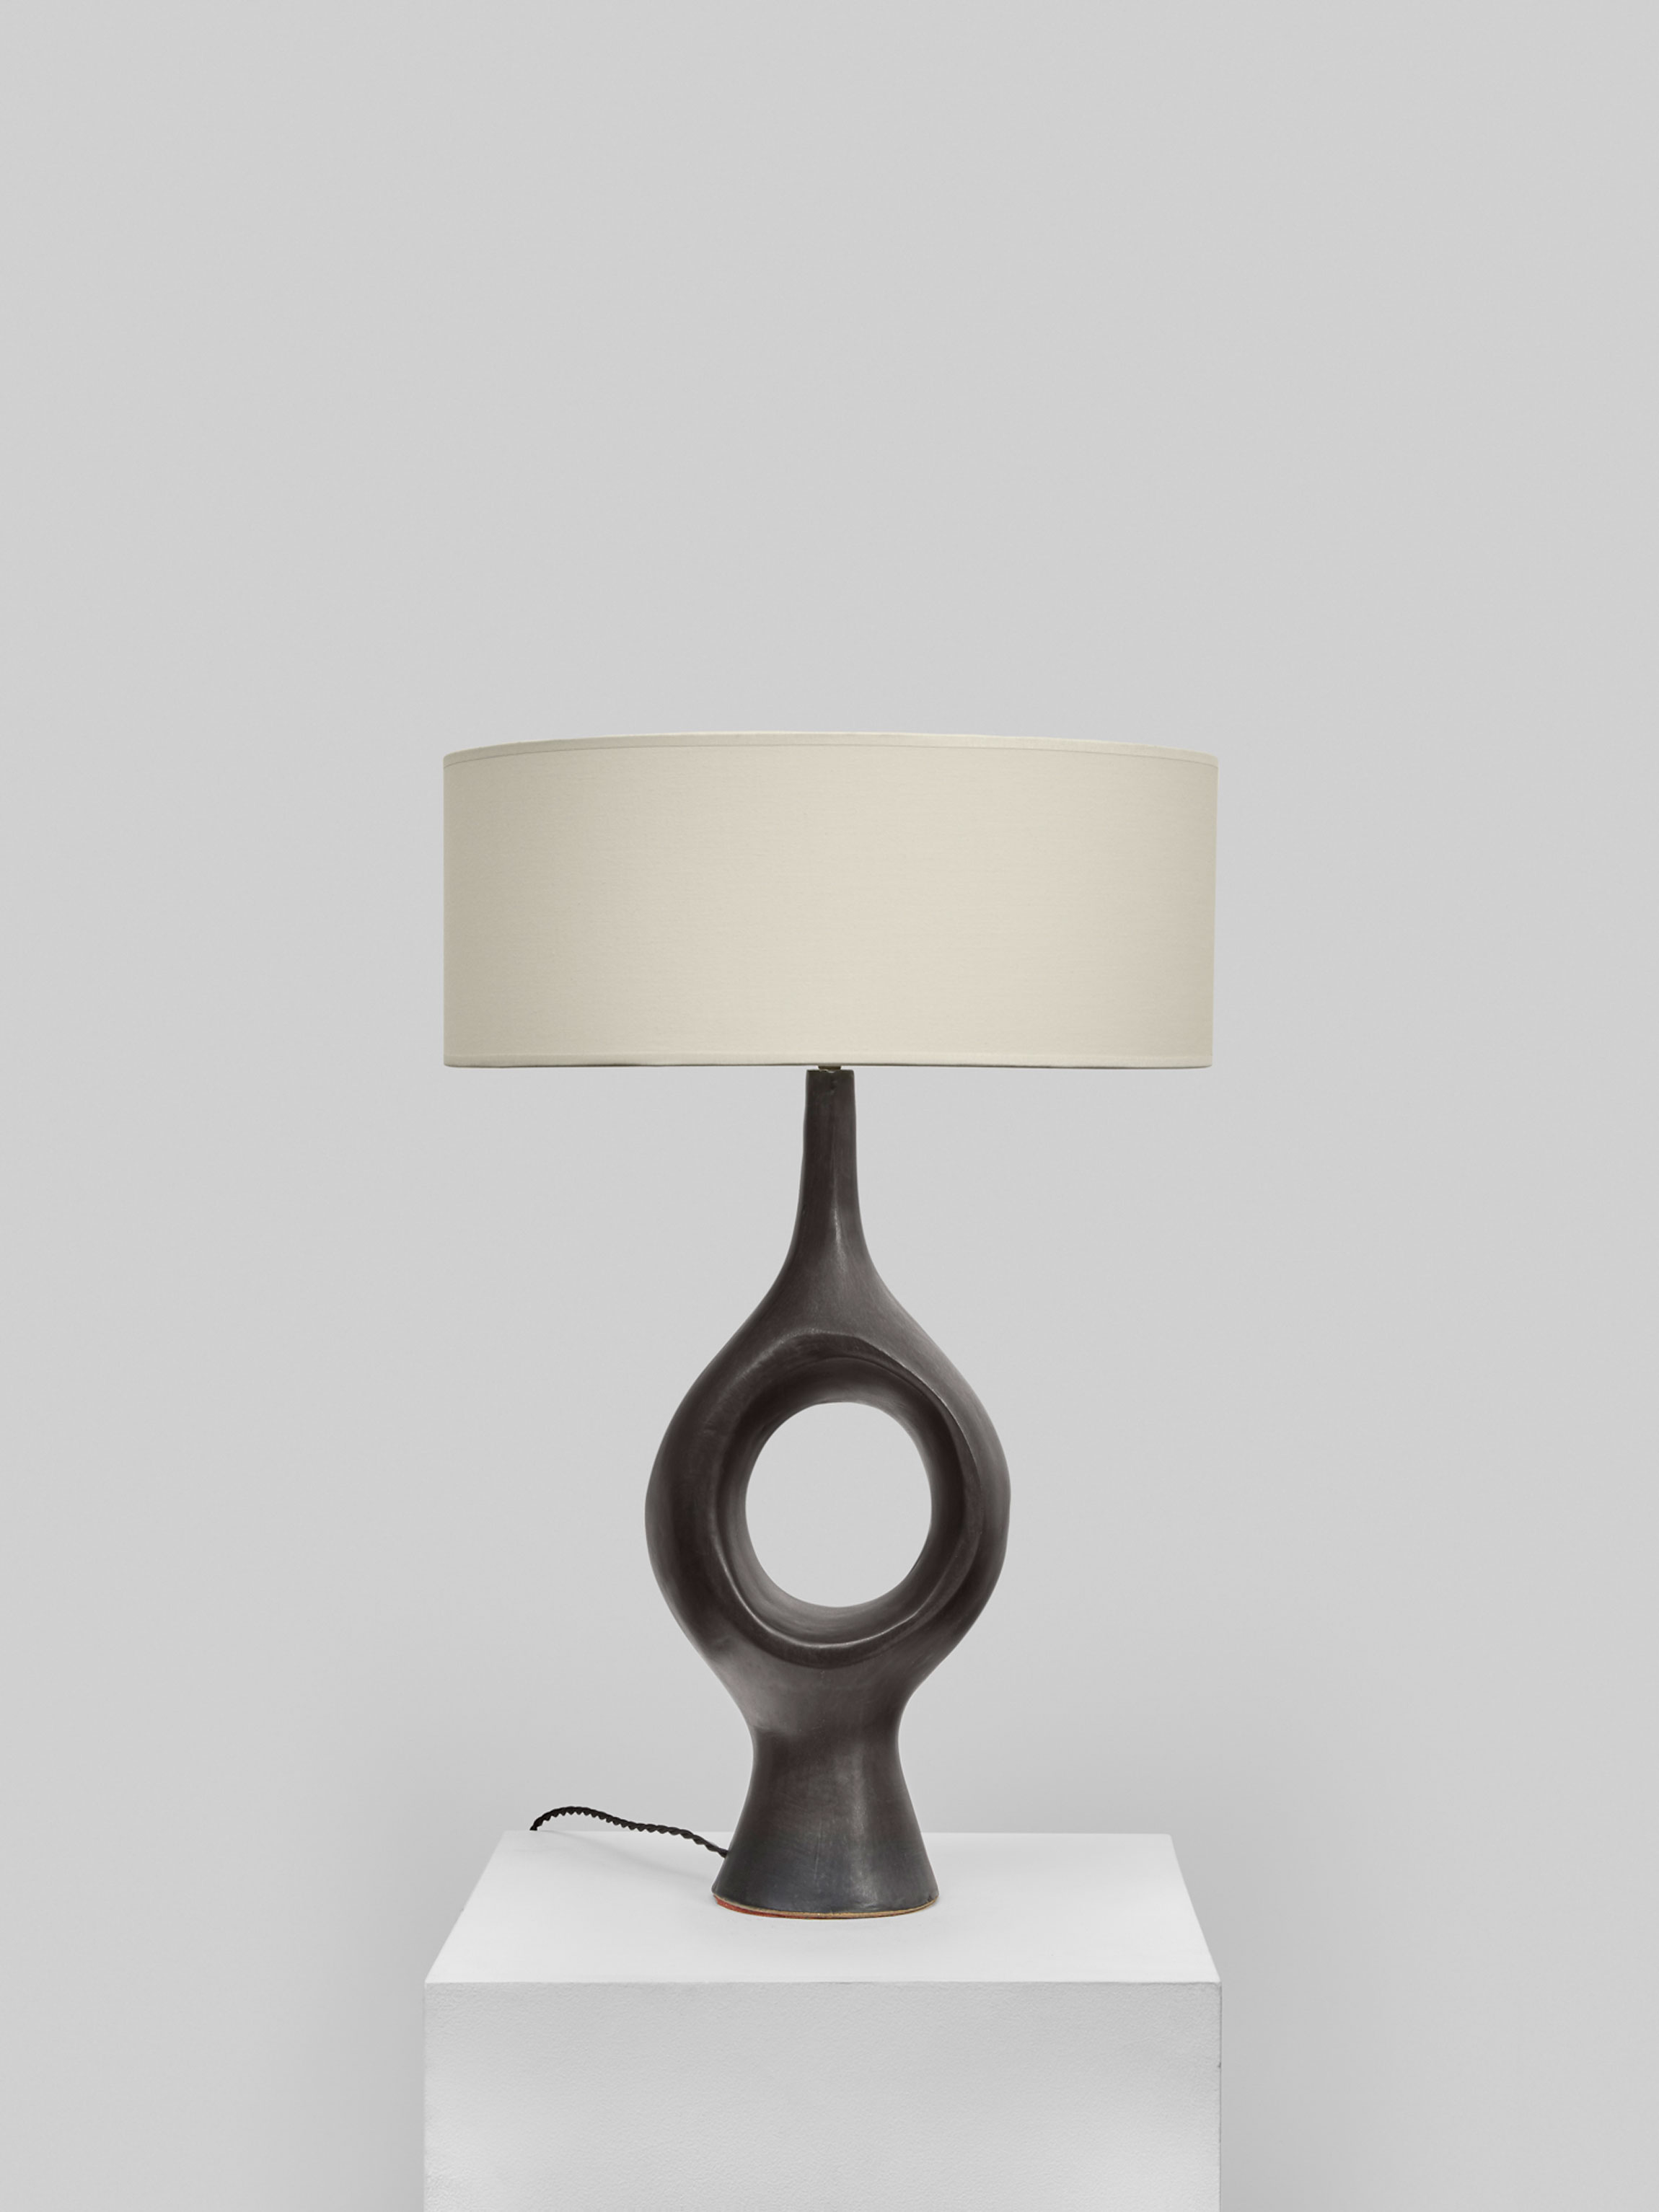 Georges Jouve, Exceptional and rare lamp, vue 01